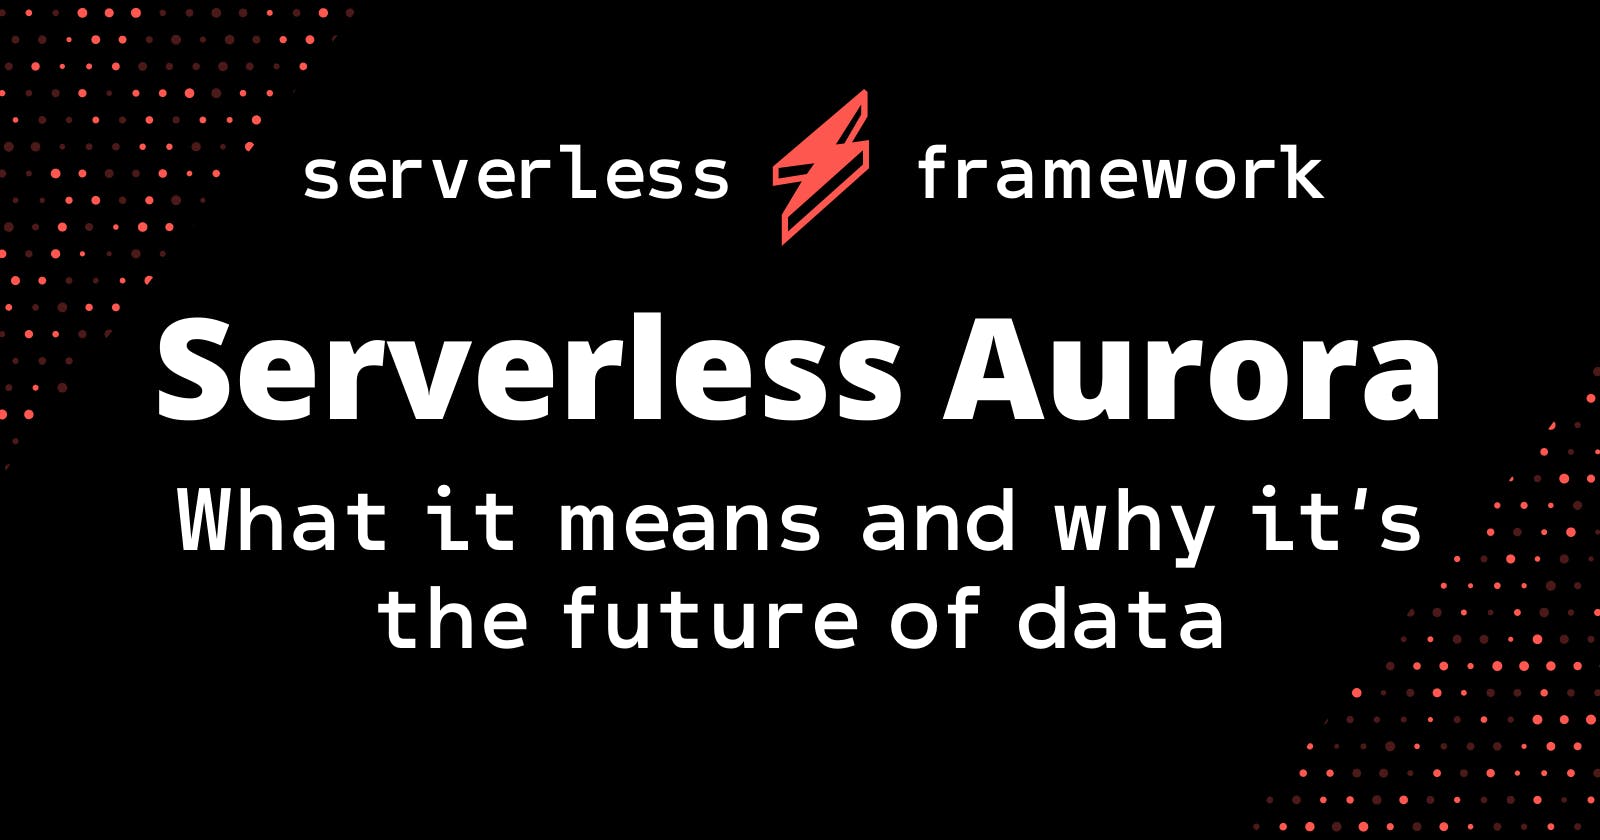 Serverless Aurora: What it means and why it’s the future of data